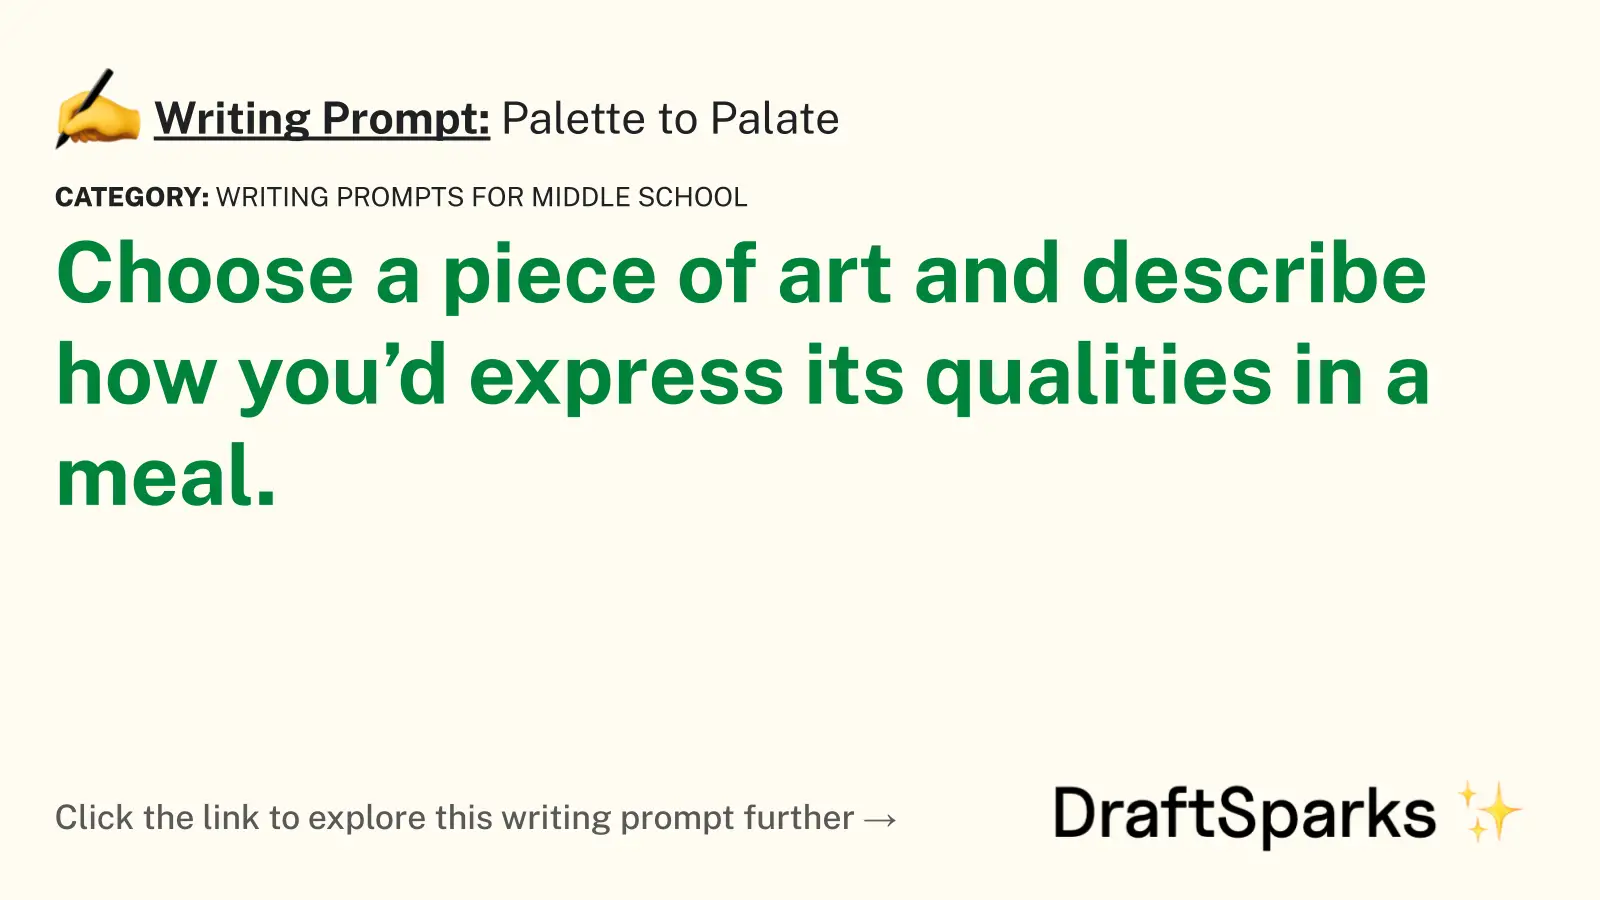 Palette to Palate